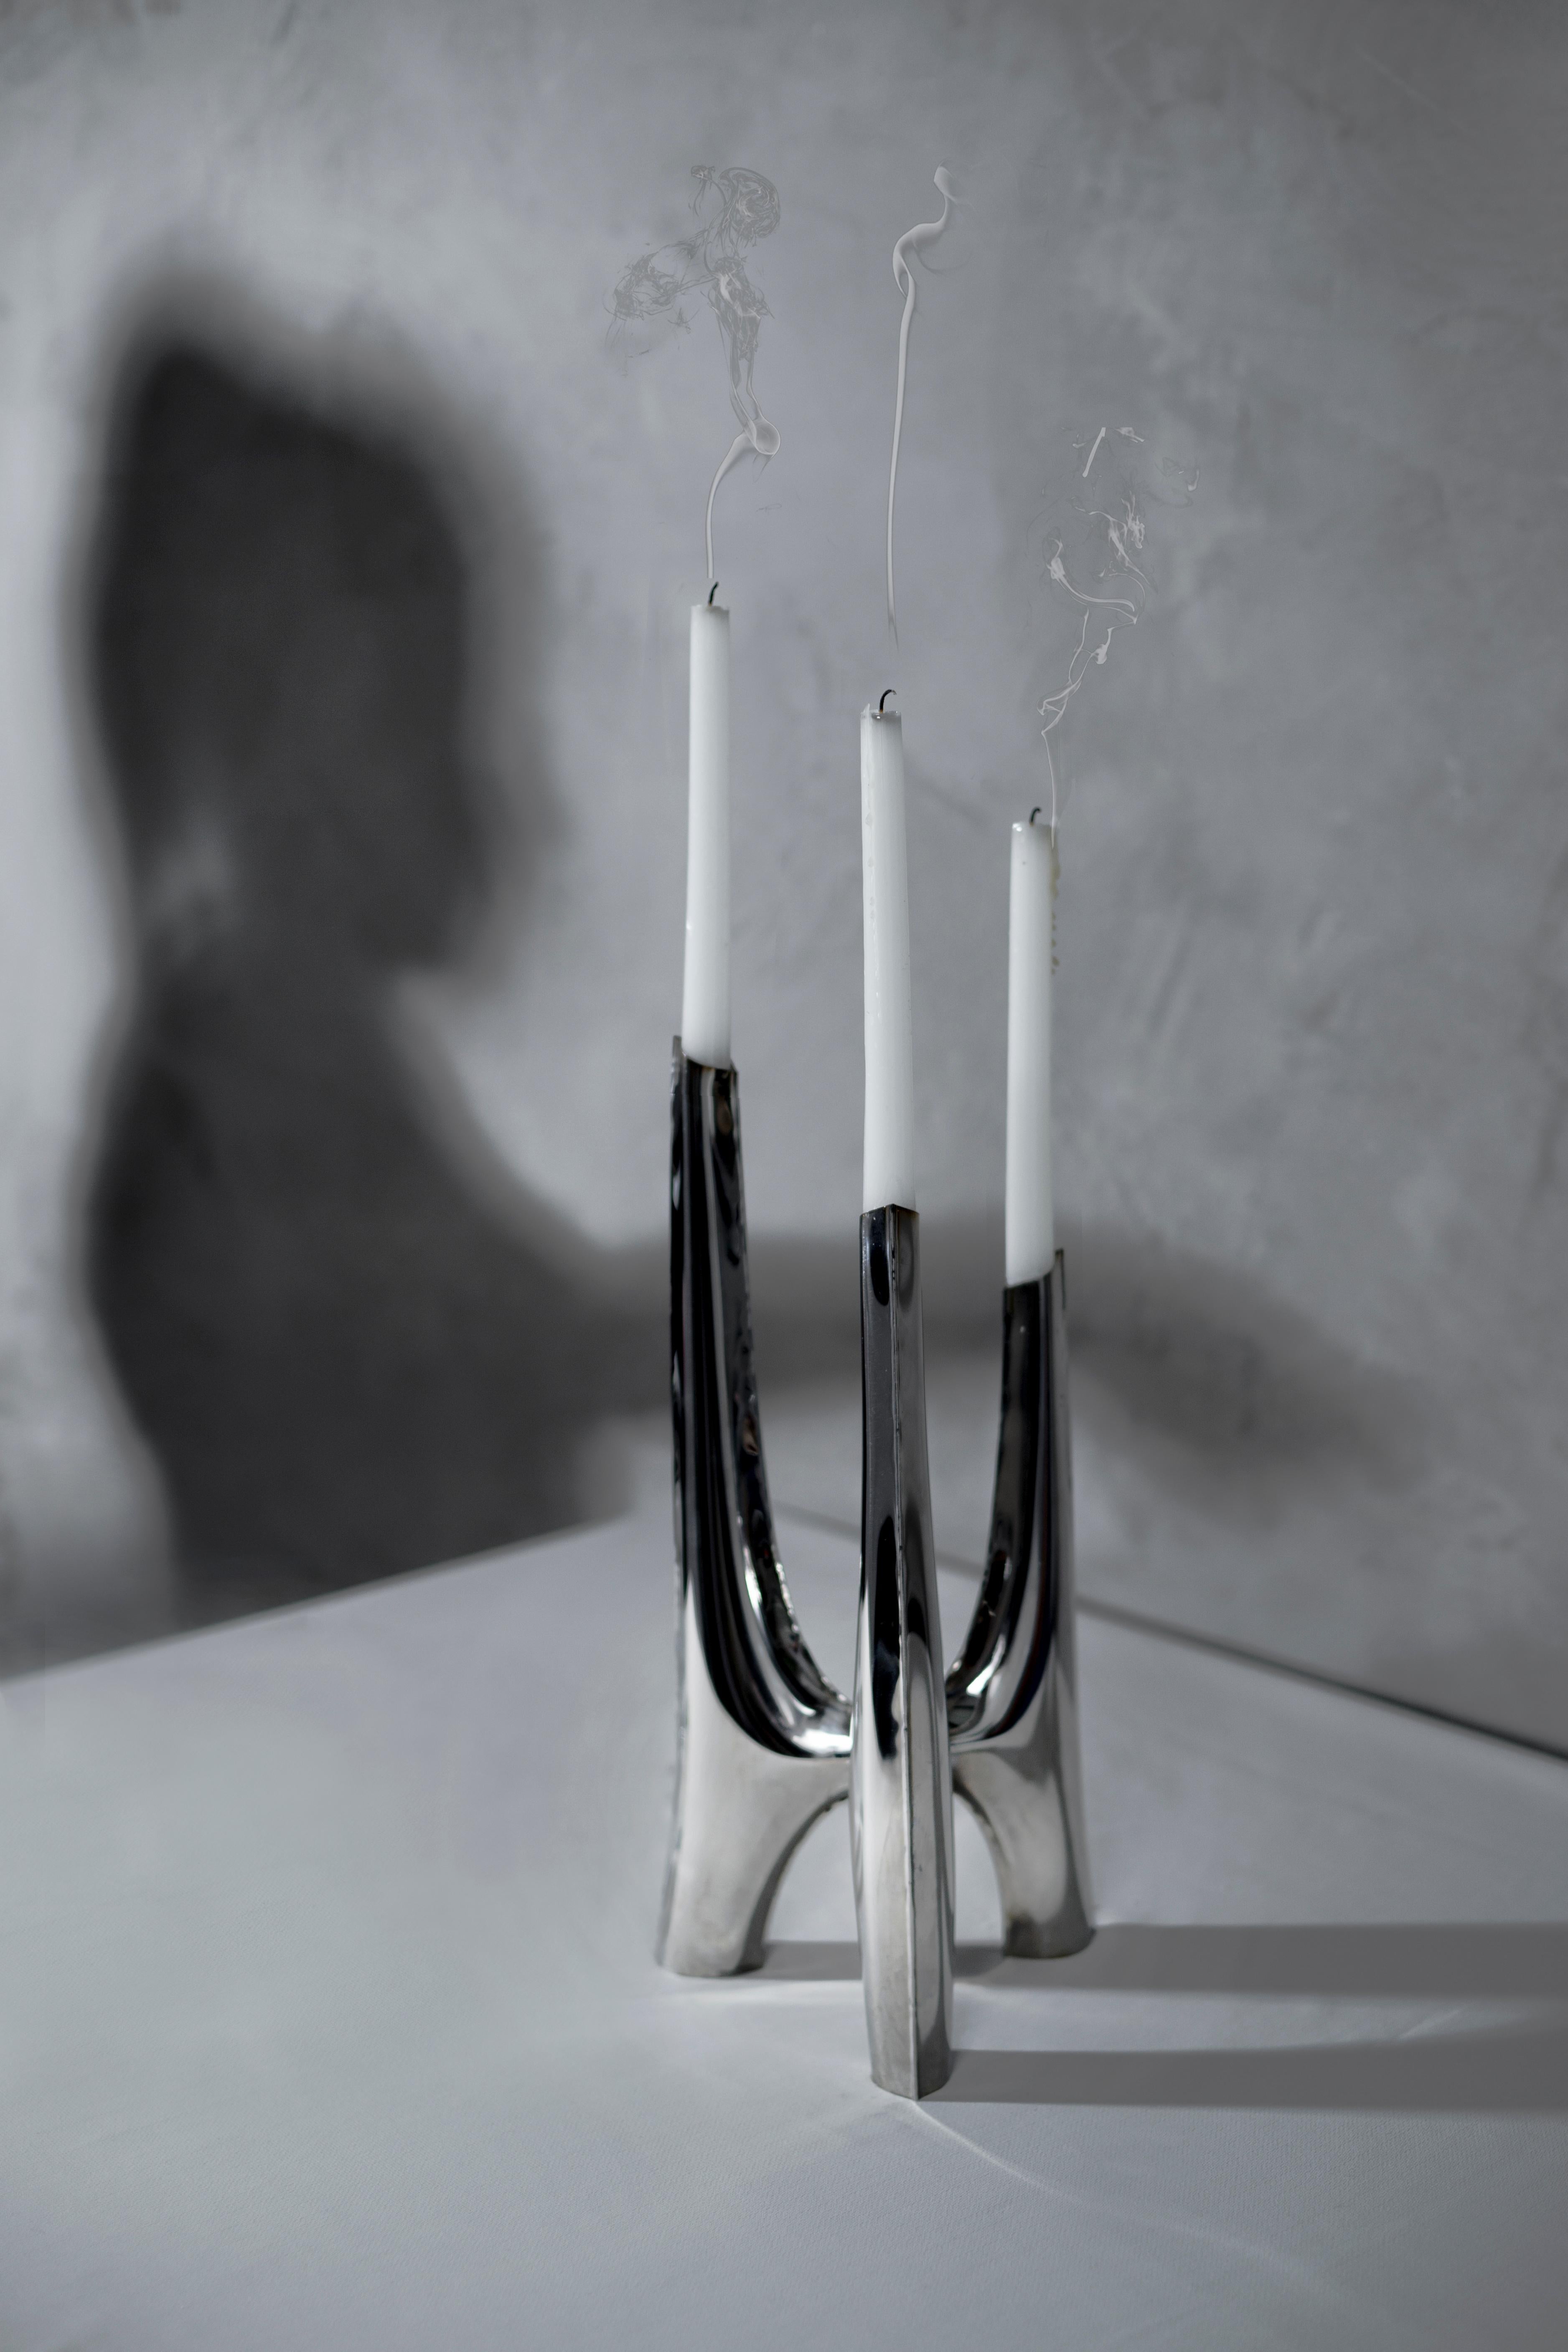 Usually made of metal, the modern candle holders are available in myriad shapes and styles. From simple, Minimalist ones to opulent, eclectic candelabra. Triglav, a steel candle holder from Zieta Studio, is a candelabrum with three arms of unusual